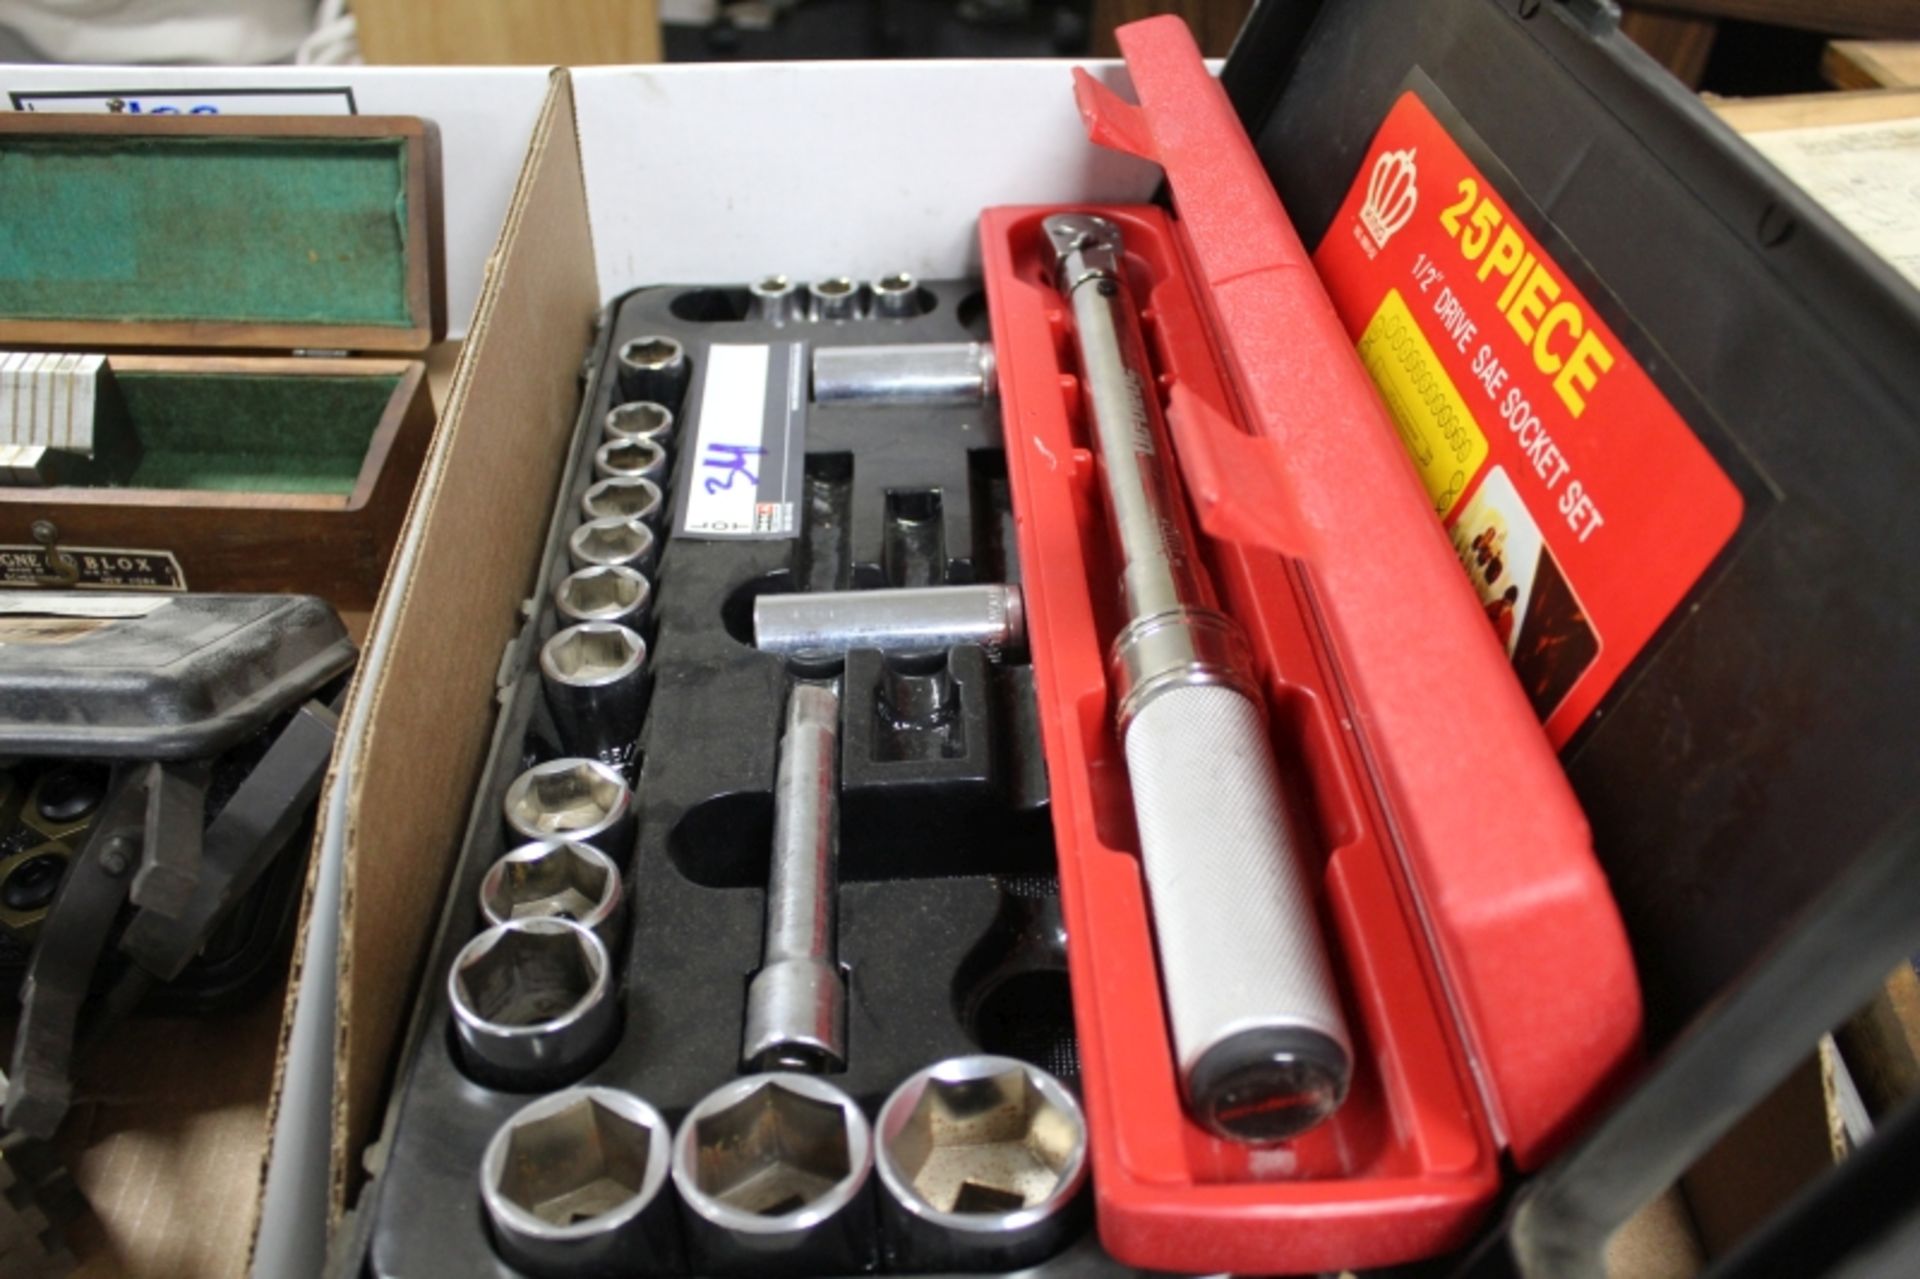 Snapon Torque Wrench and Ratchet Set - Image 2 of 2